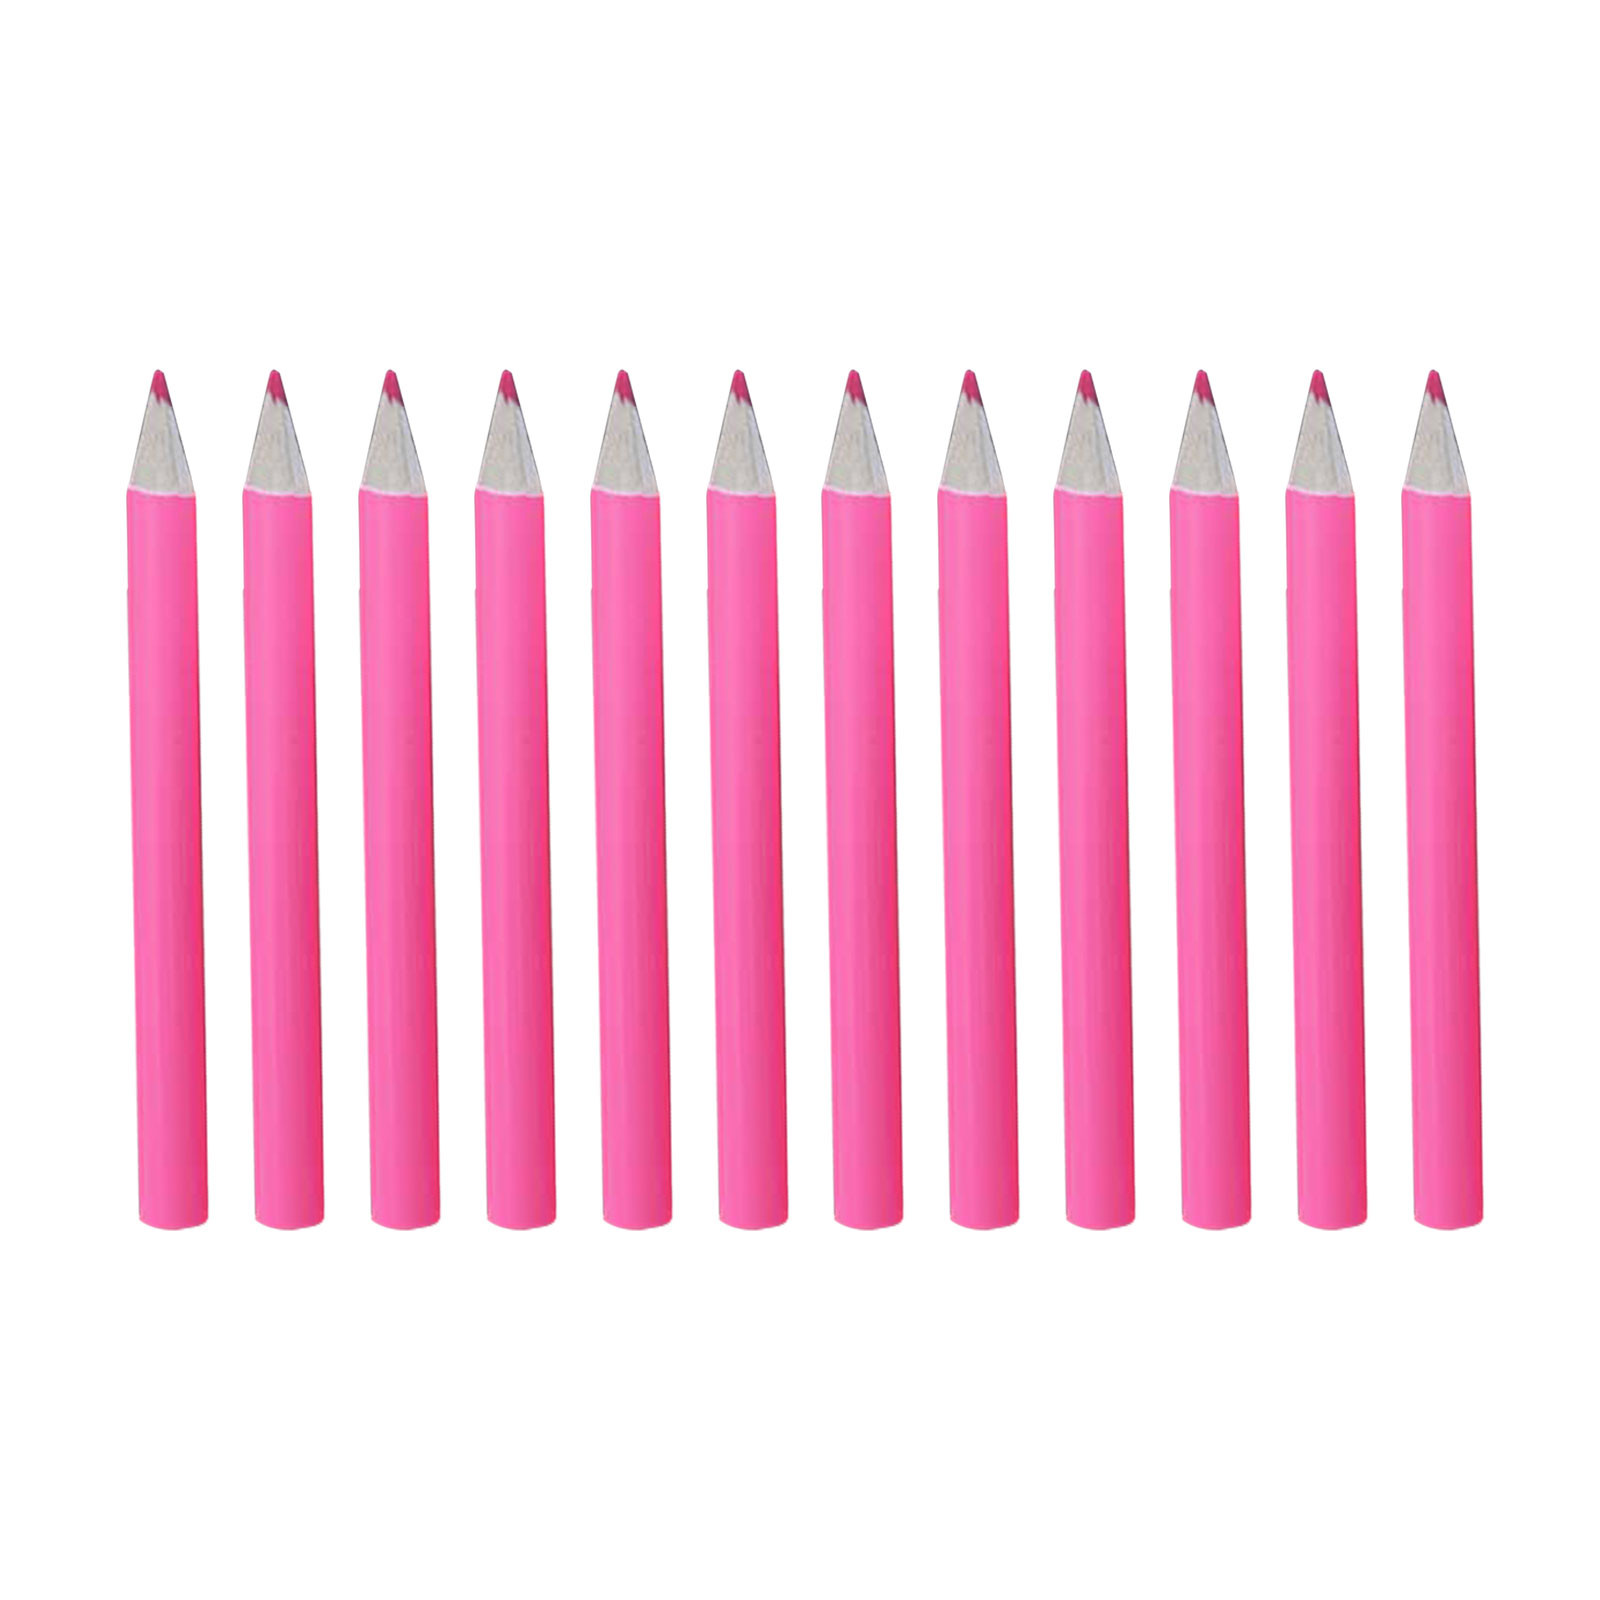 AZZAKVG Stationery Supplies Quality Large Pencils Artists Drawing Kids Adults Colored Pencils for Kids Ages 8-12 Kids Crafts, Pink